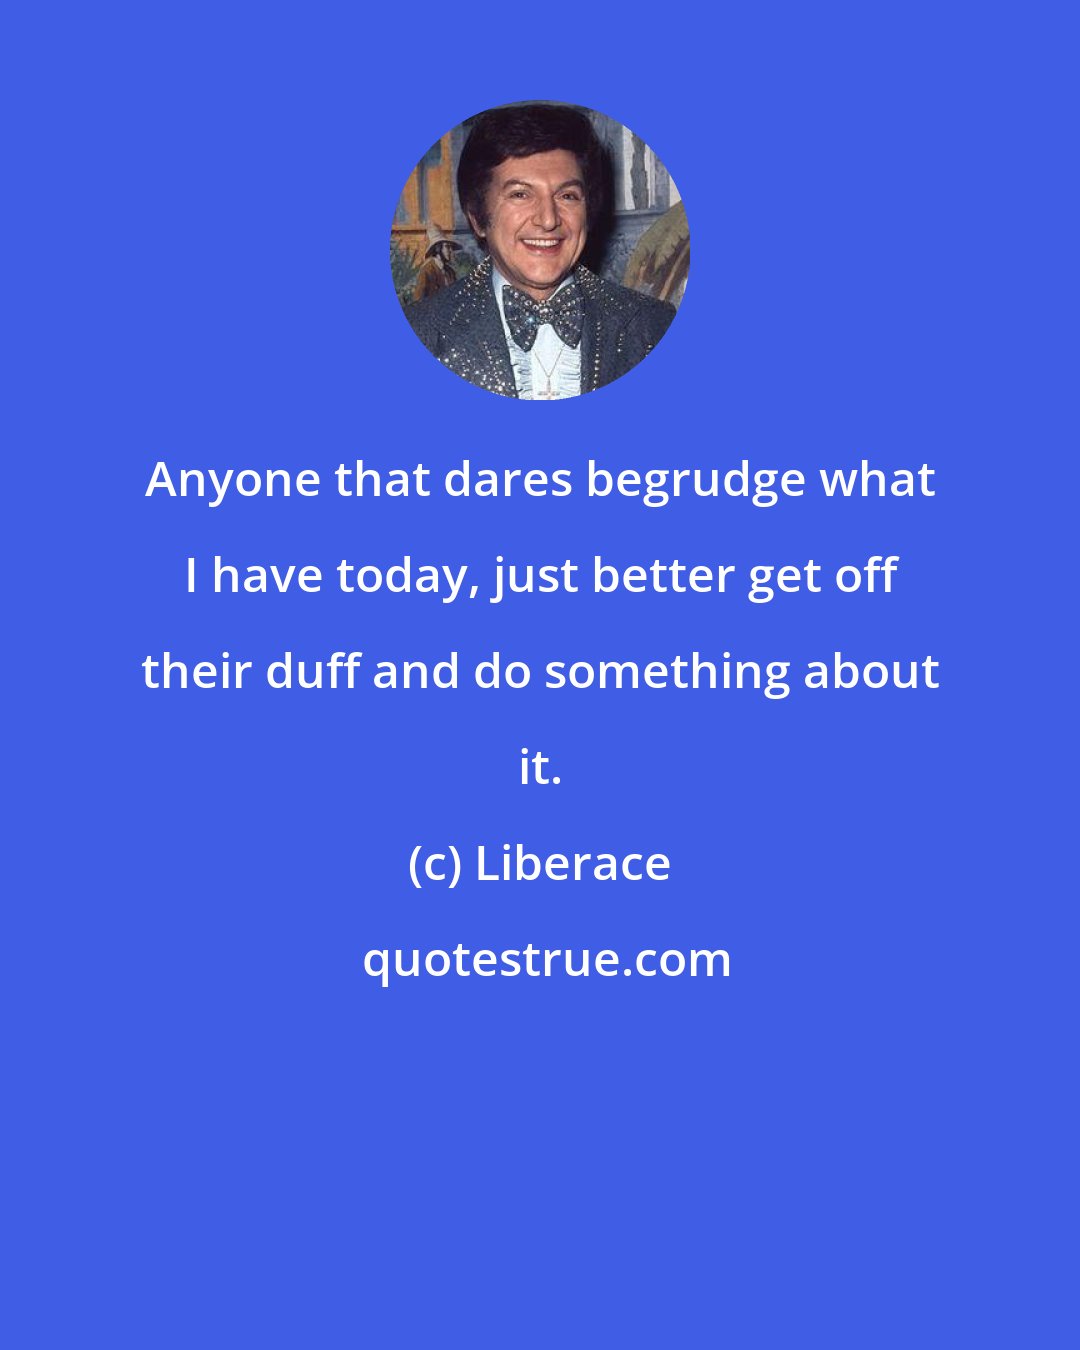 Liberace: Anyone that dares begrudge what I have today, just better get off their duff and do something about it.